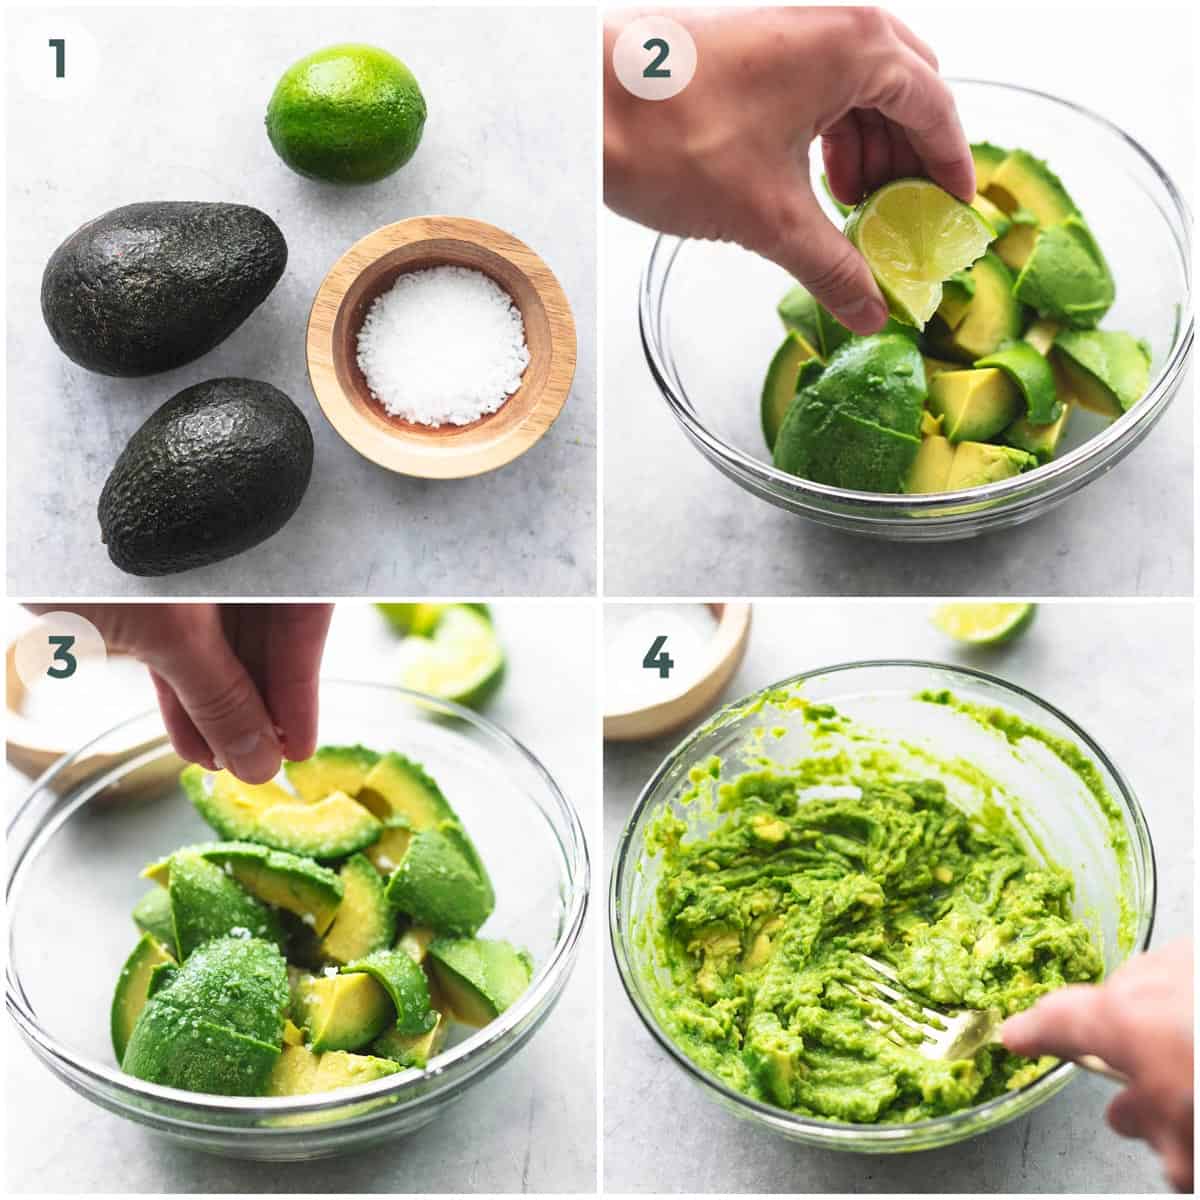 four steps of preparation of guacamole